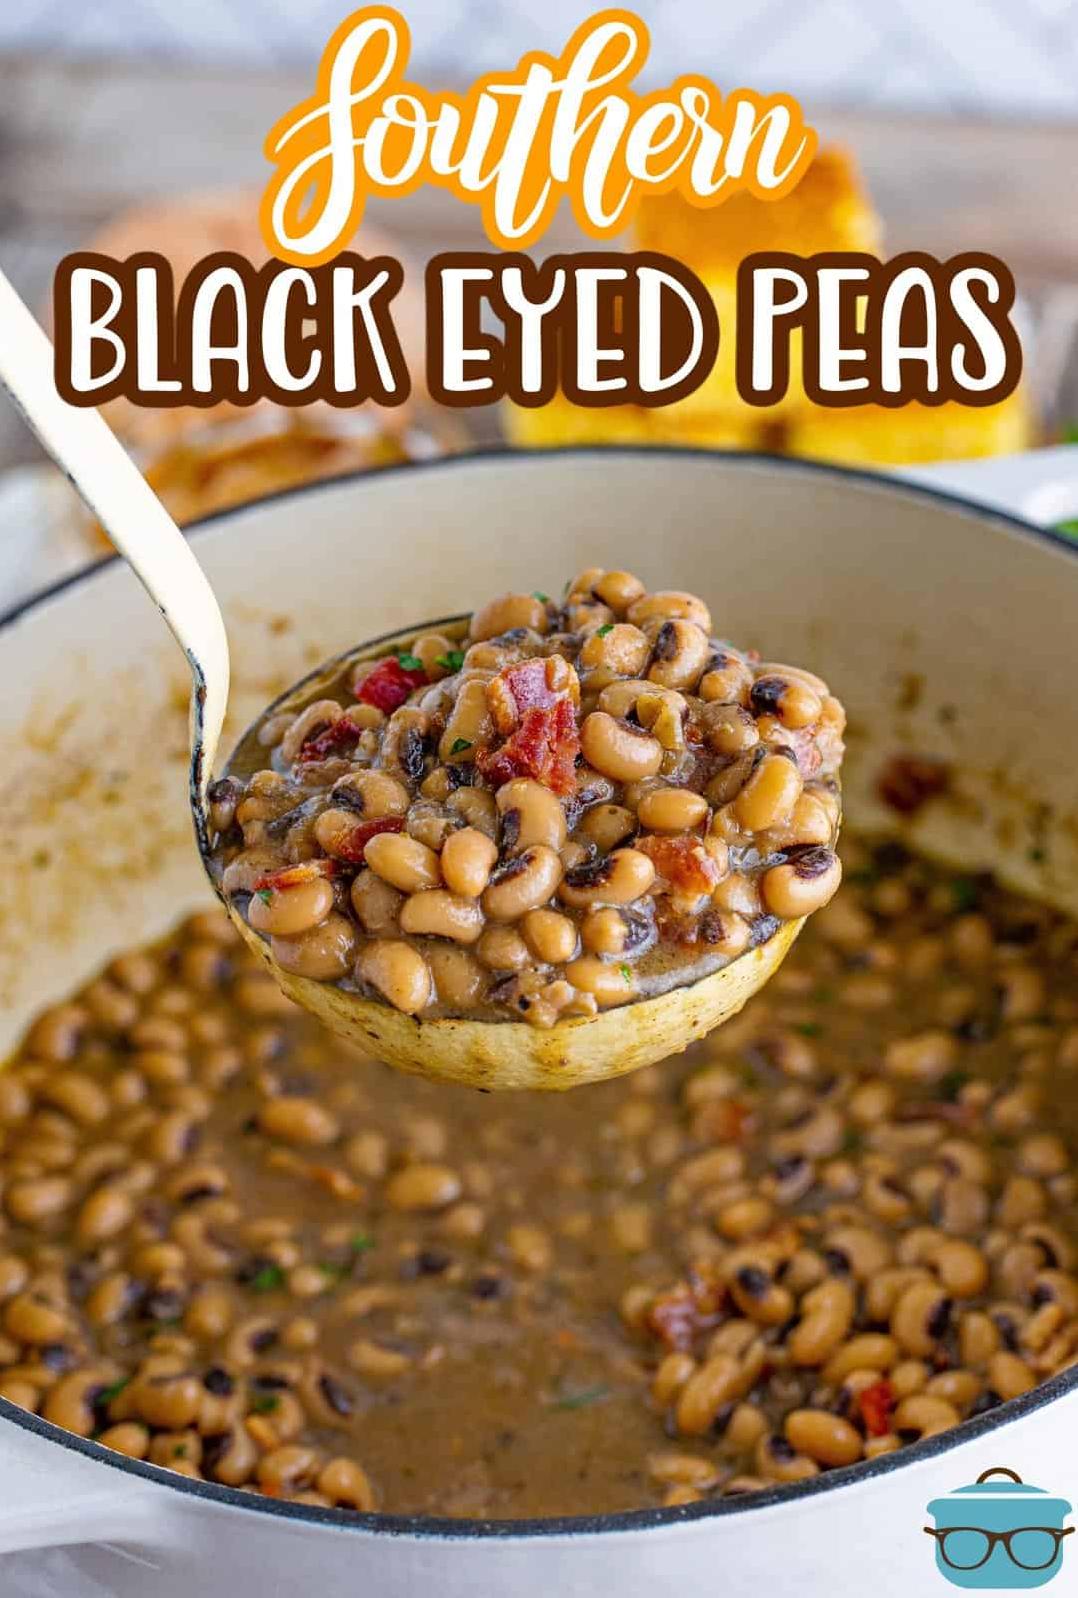  These black-eyed peas are the perfect addition to any southern-inspired spread.